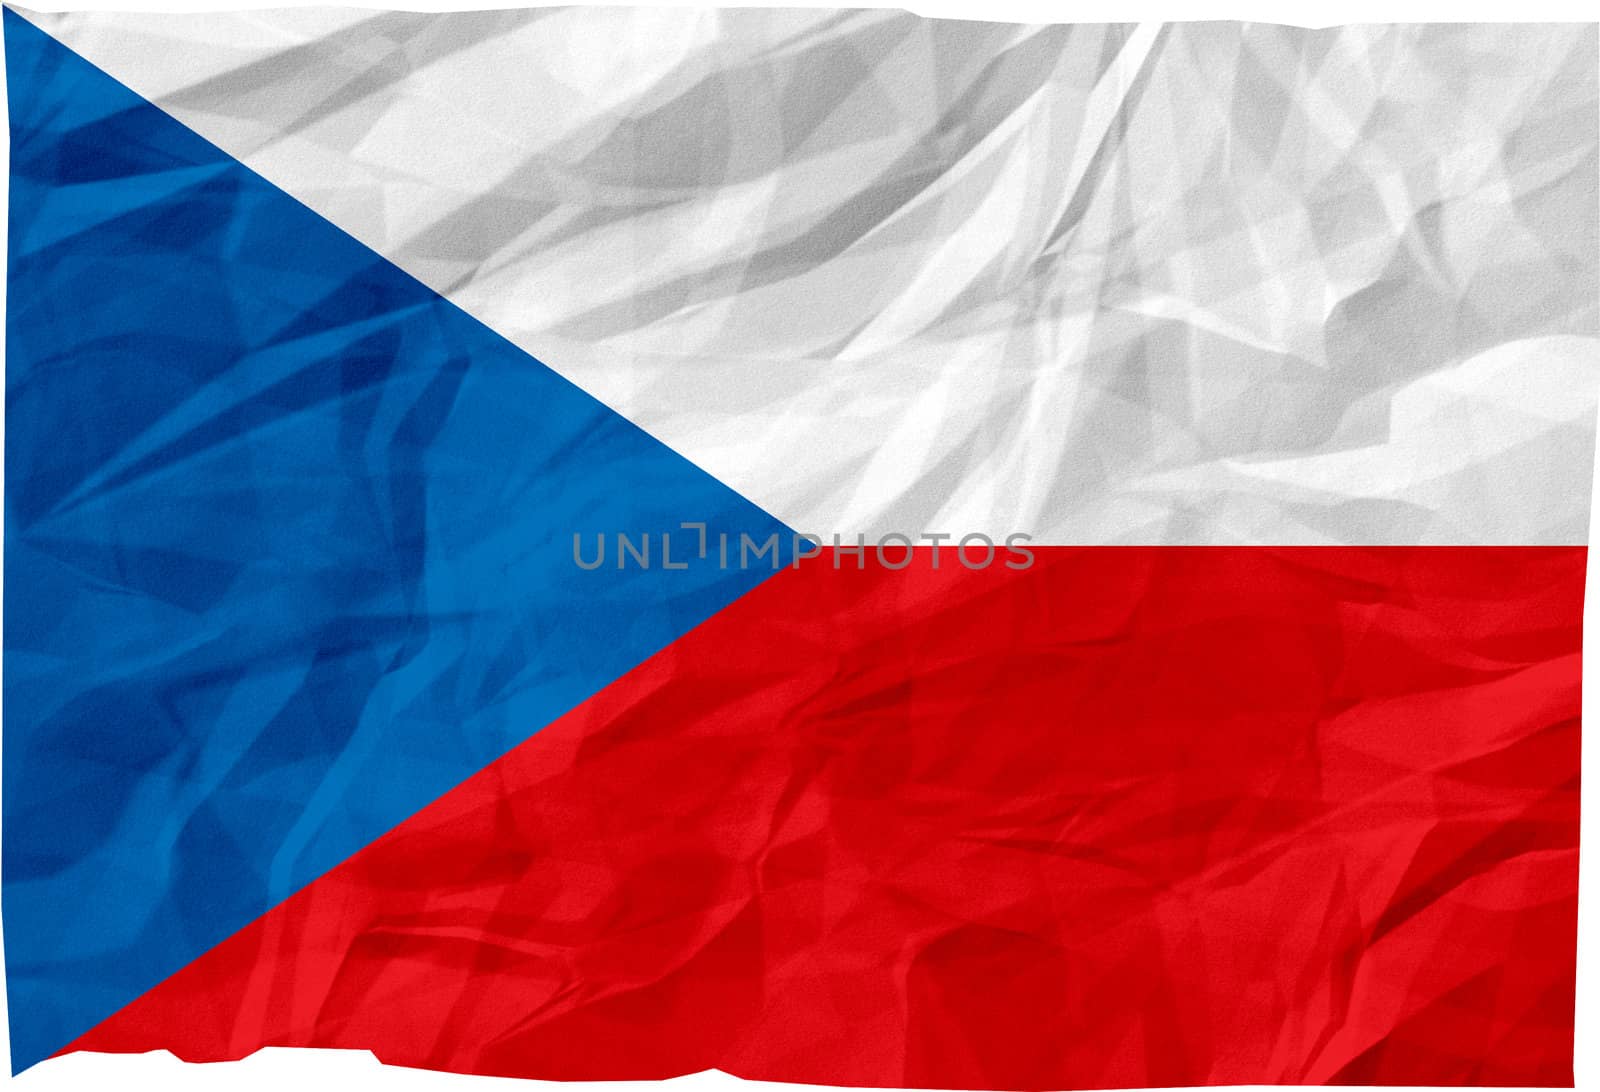 The national flag of Czech Republic (Europe).